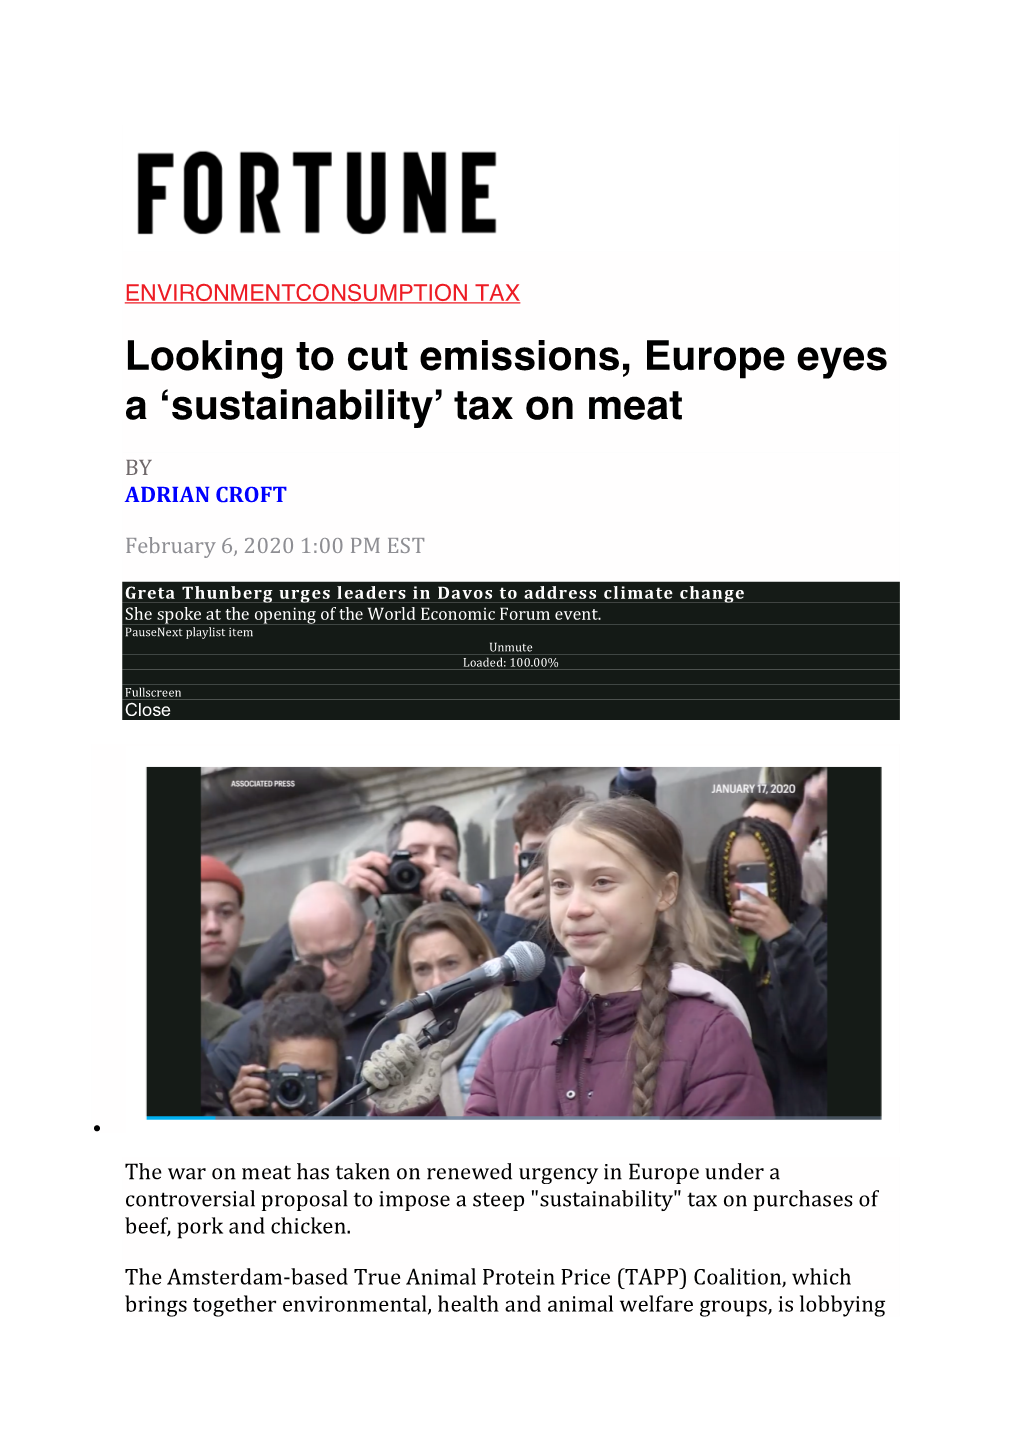 Looking to Cut Emissions, Europe Eyes a 'Sustainability' Tax on Meat